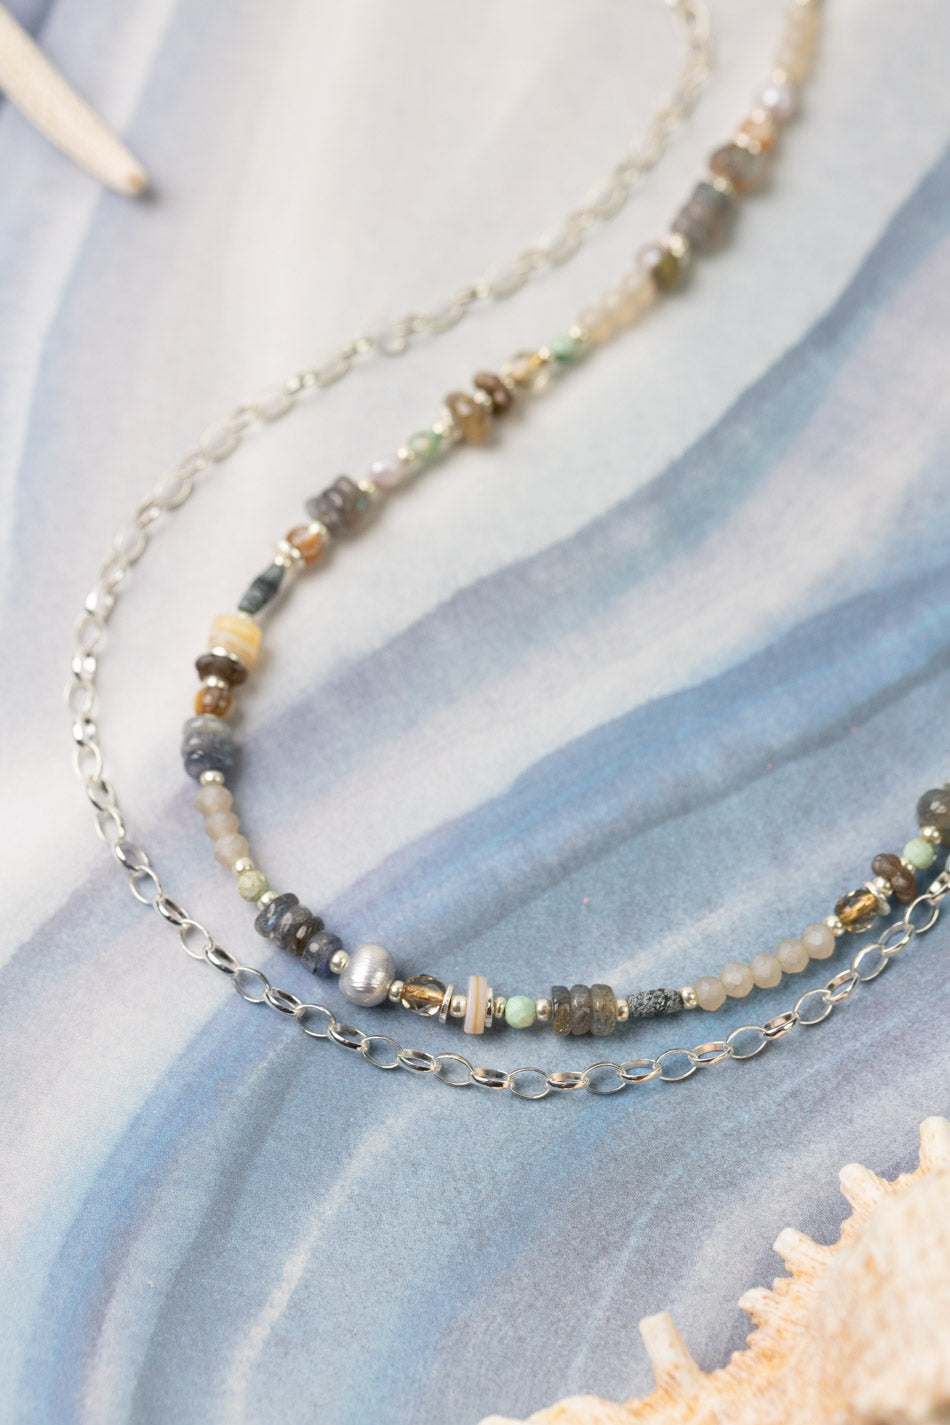 Mystic 18-20" Abalone And Freshwater Pearl Multistrand Necklace